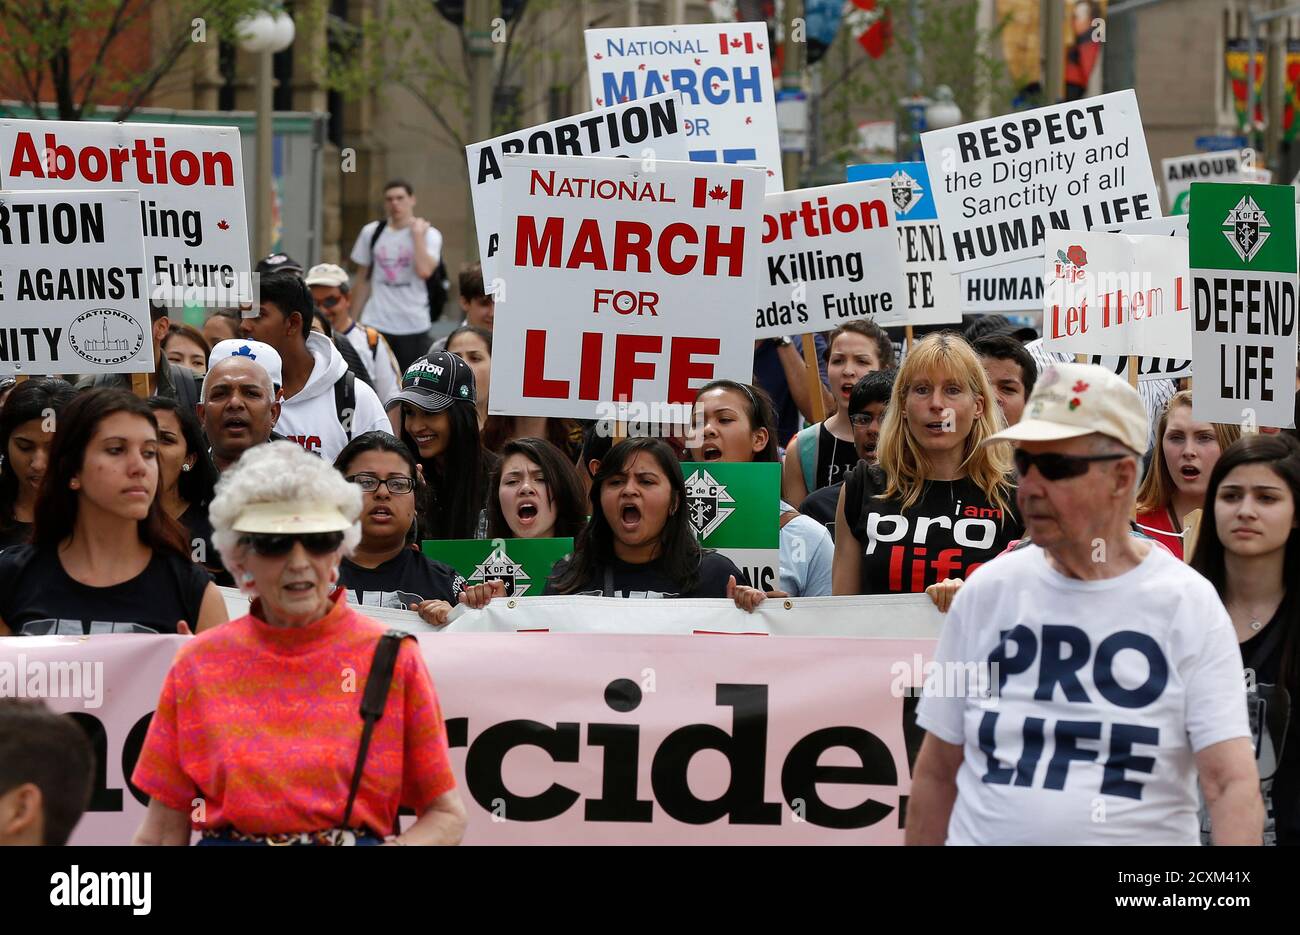 Anti-abortion protesters take part in the National March for Life in Ottawa May 9, 2013.  REUTERS/Chris Wattie (CANADA - Tags: CIVIL UNREST POLITICS) Stock Photo